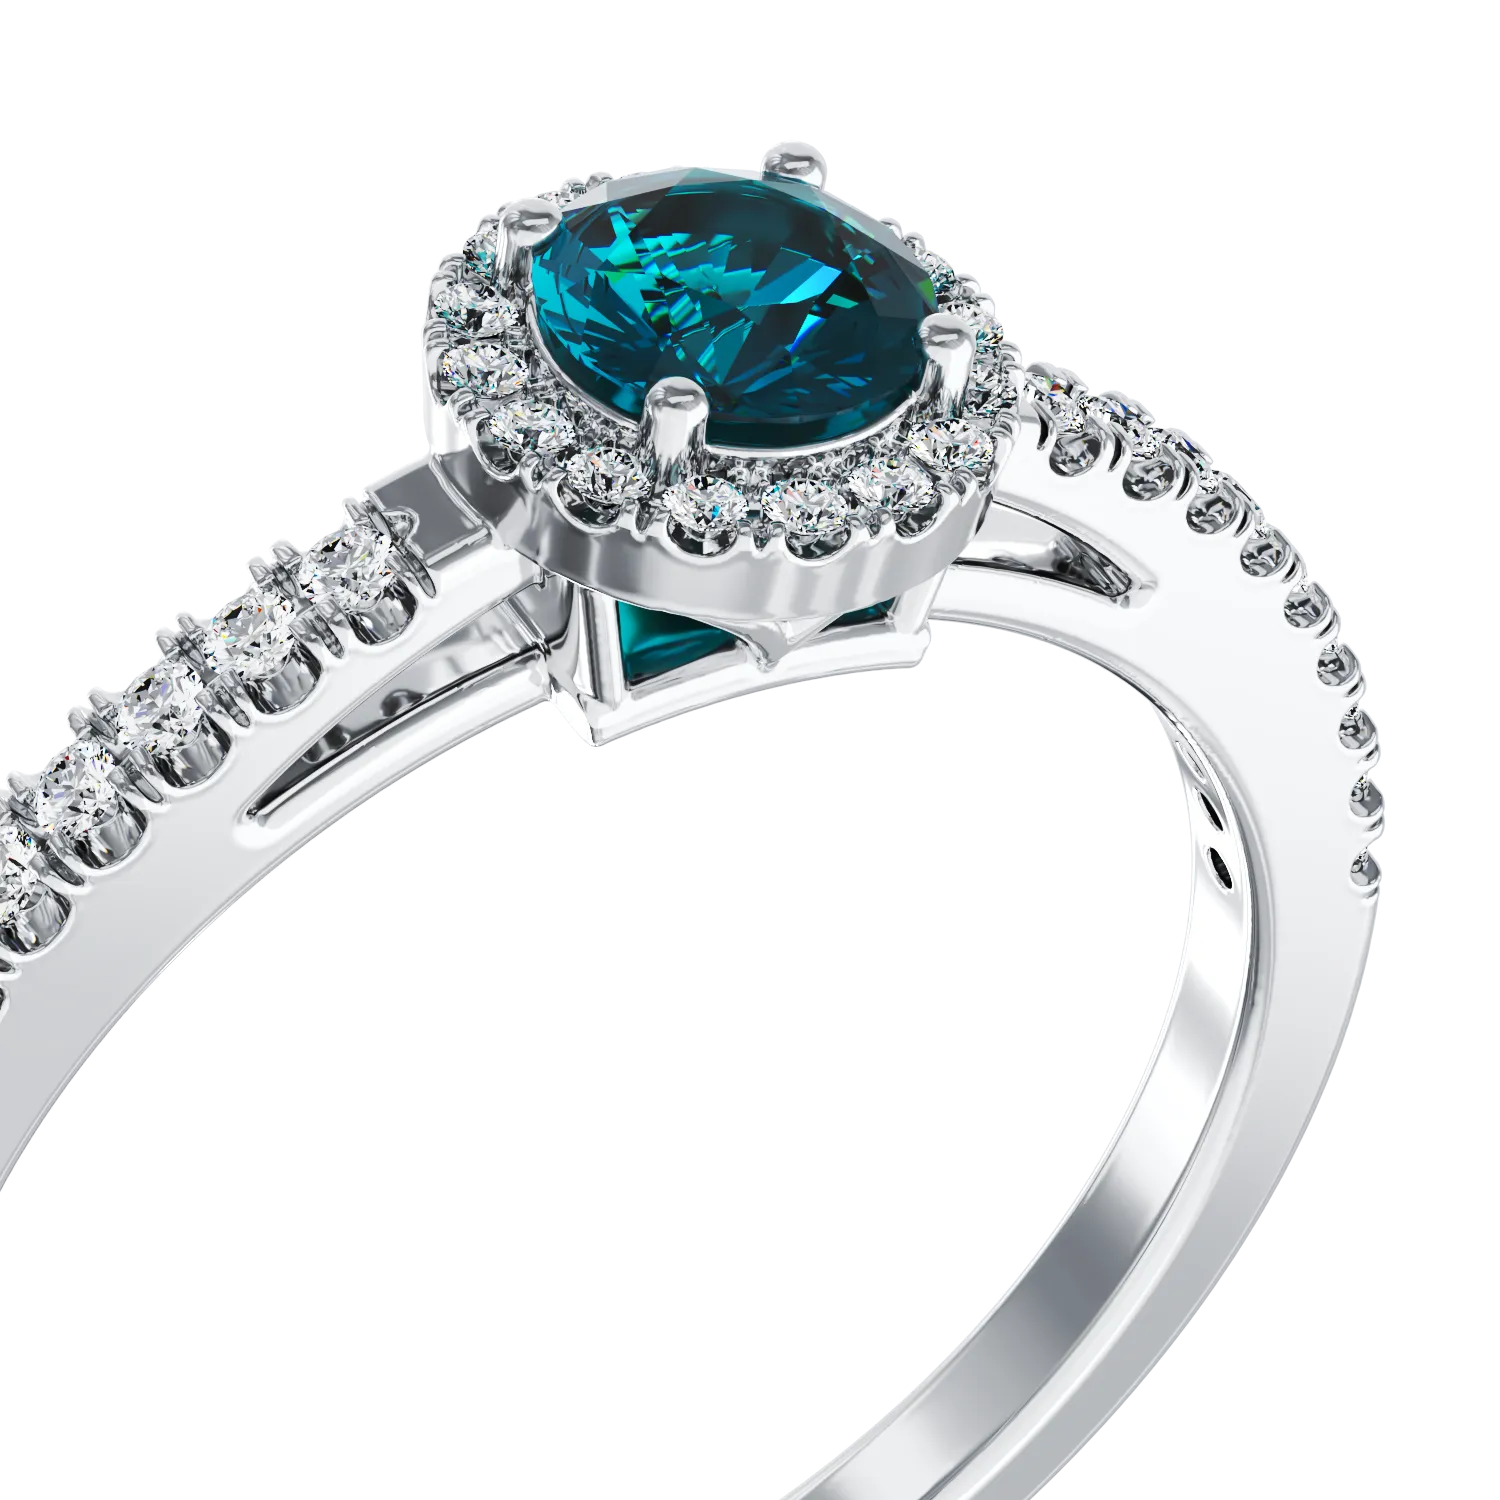 18K white gold engagement ring with 0.32ct blue diamond and 0.2ct diamonds